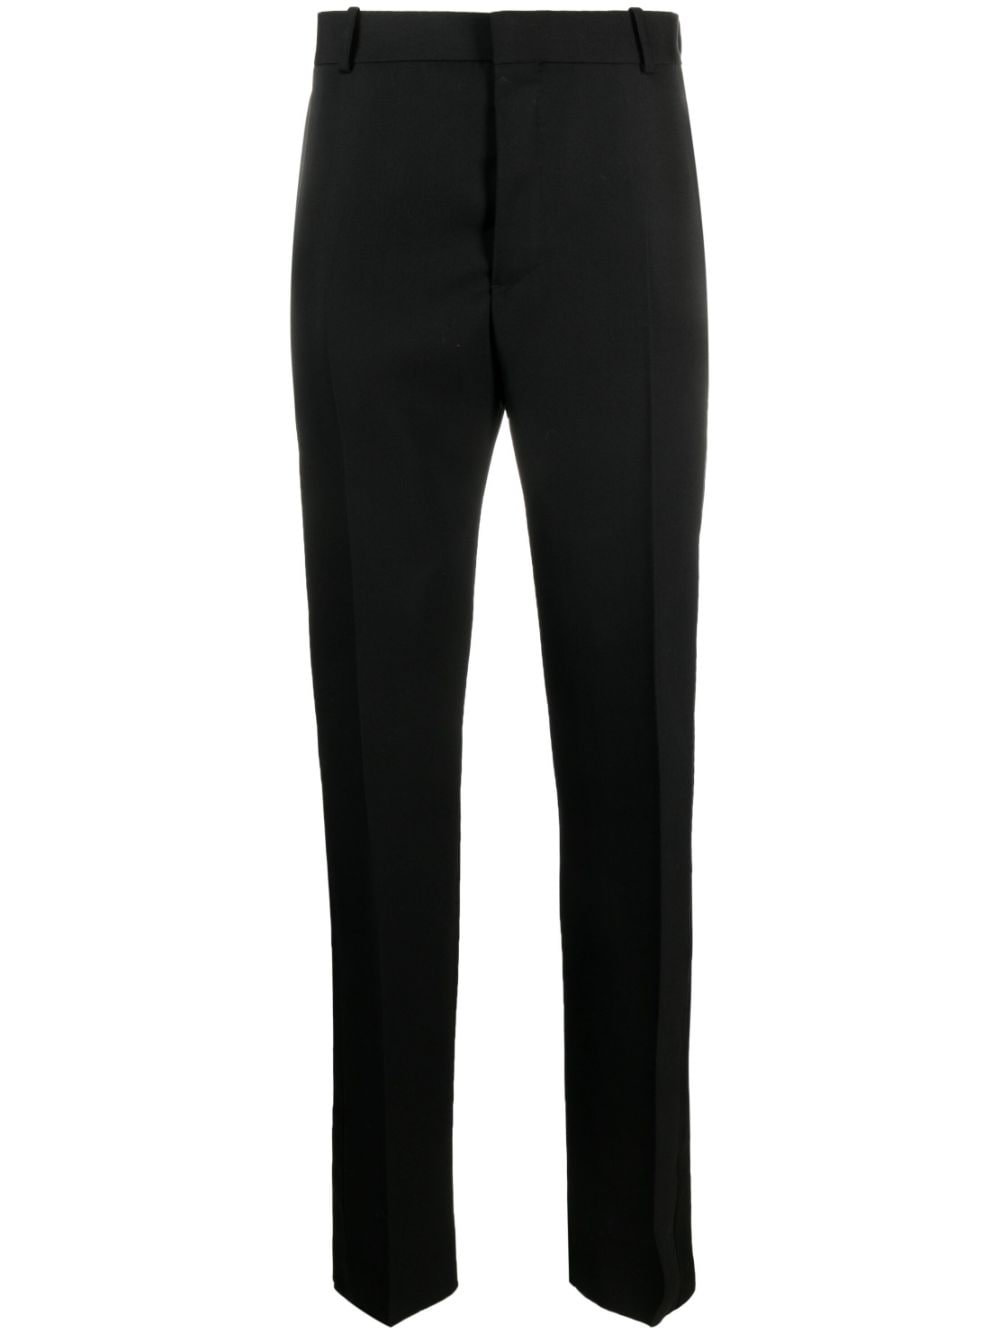 ALEXANDER MCQUEEN Satin-Trimmed Tailored Trousers for Men in Black - FW23